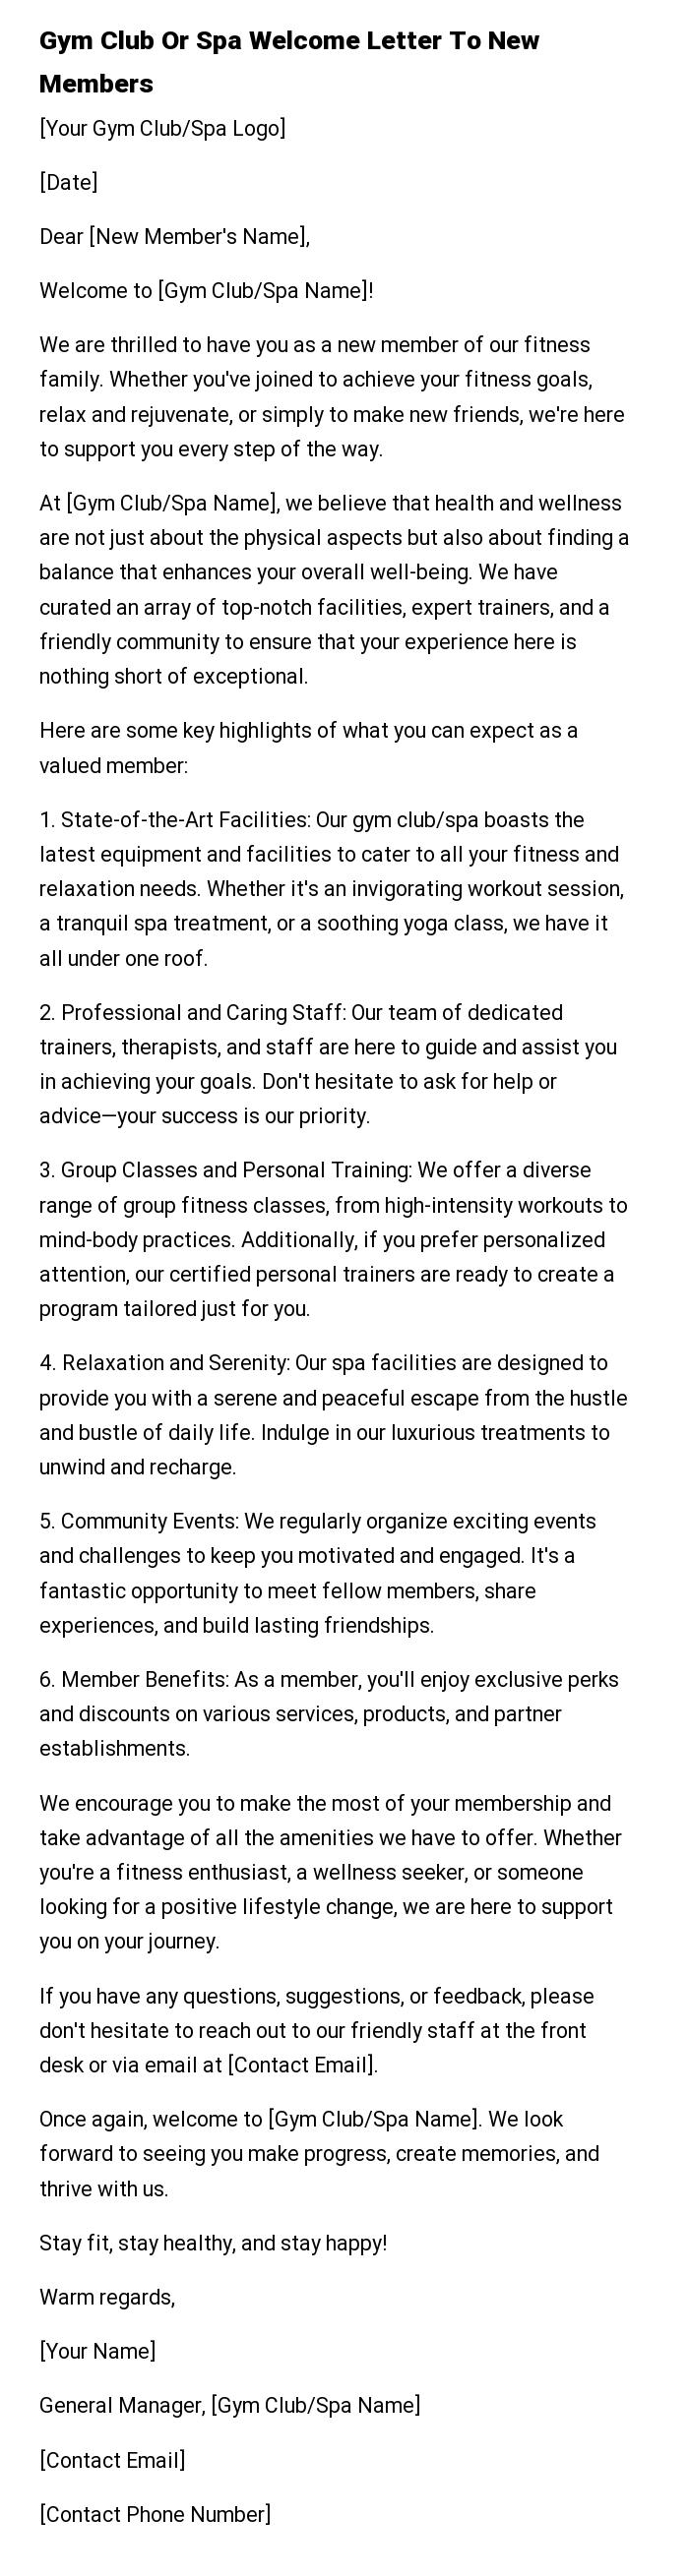 Gym Club Or Spa Welcome Letter To New Members